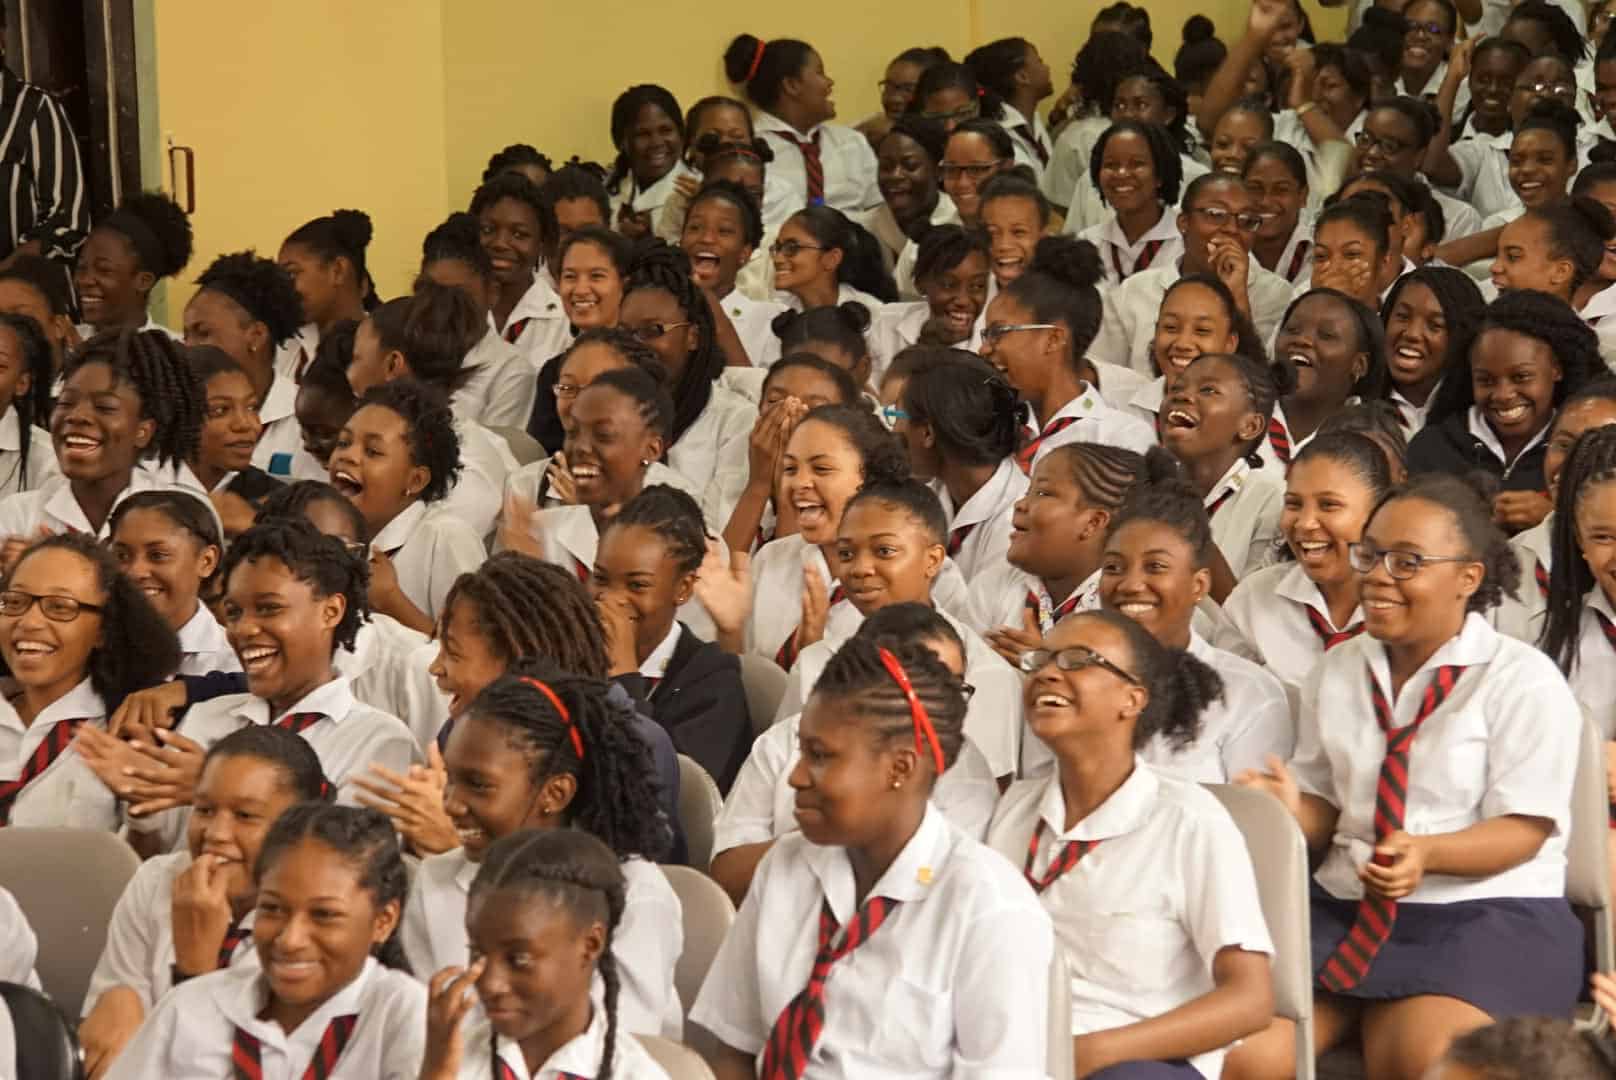 Packed into school hall, BAHS girls enraptured by what they hear.